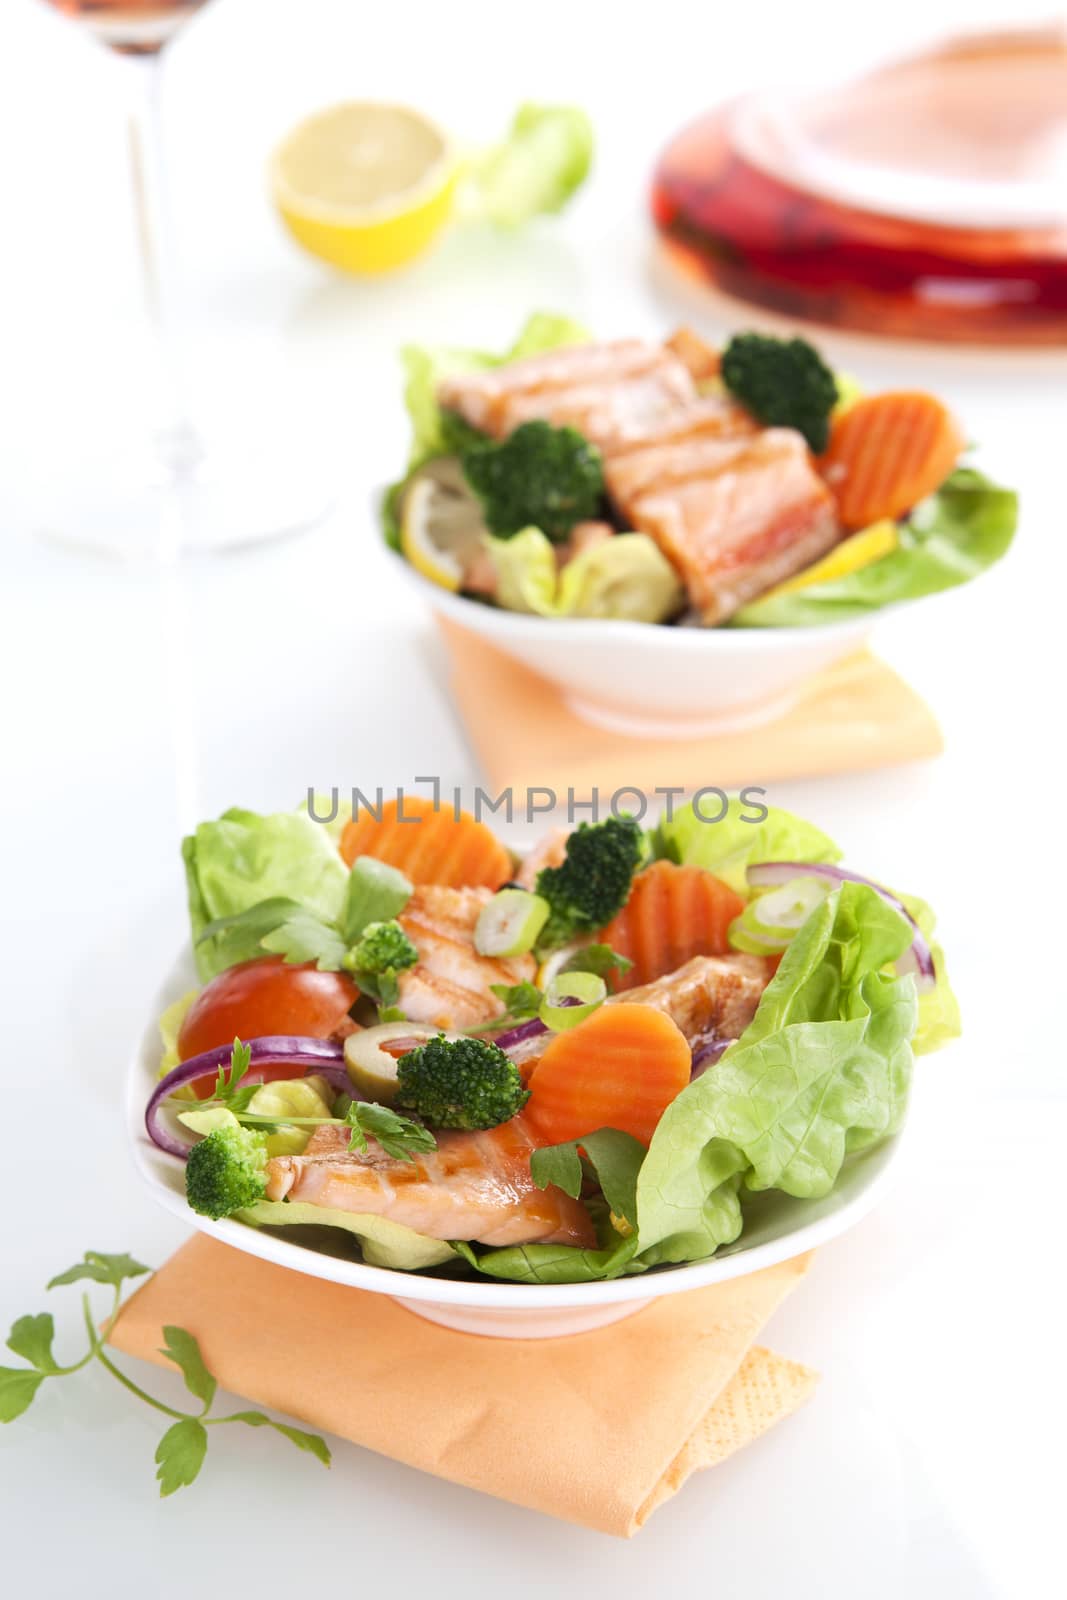 Salad with salmon and fresh vegetables, lemon and rose wine in the background.